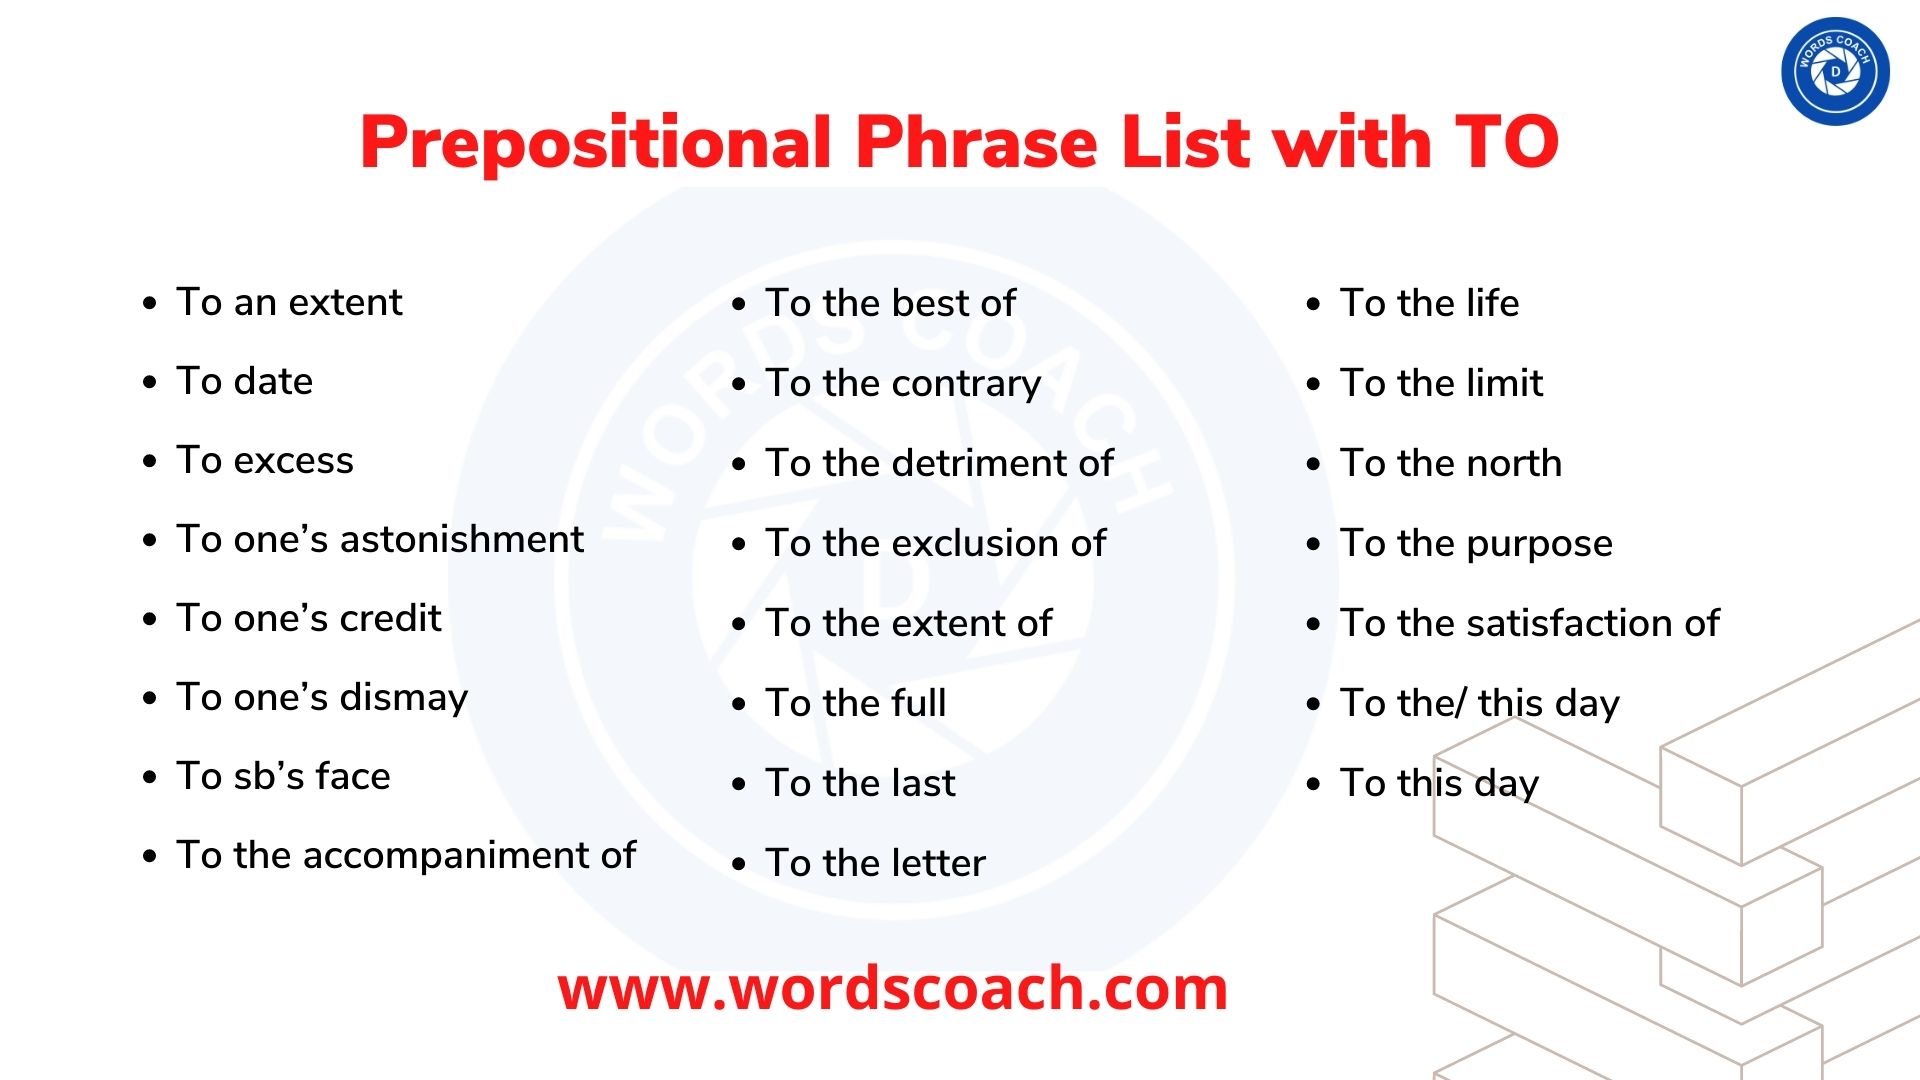 Prepositional Phrase List with TO - wordscoach.com